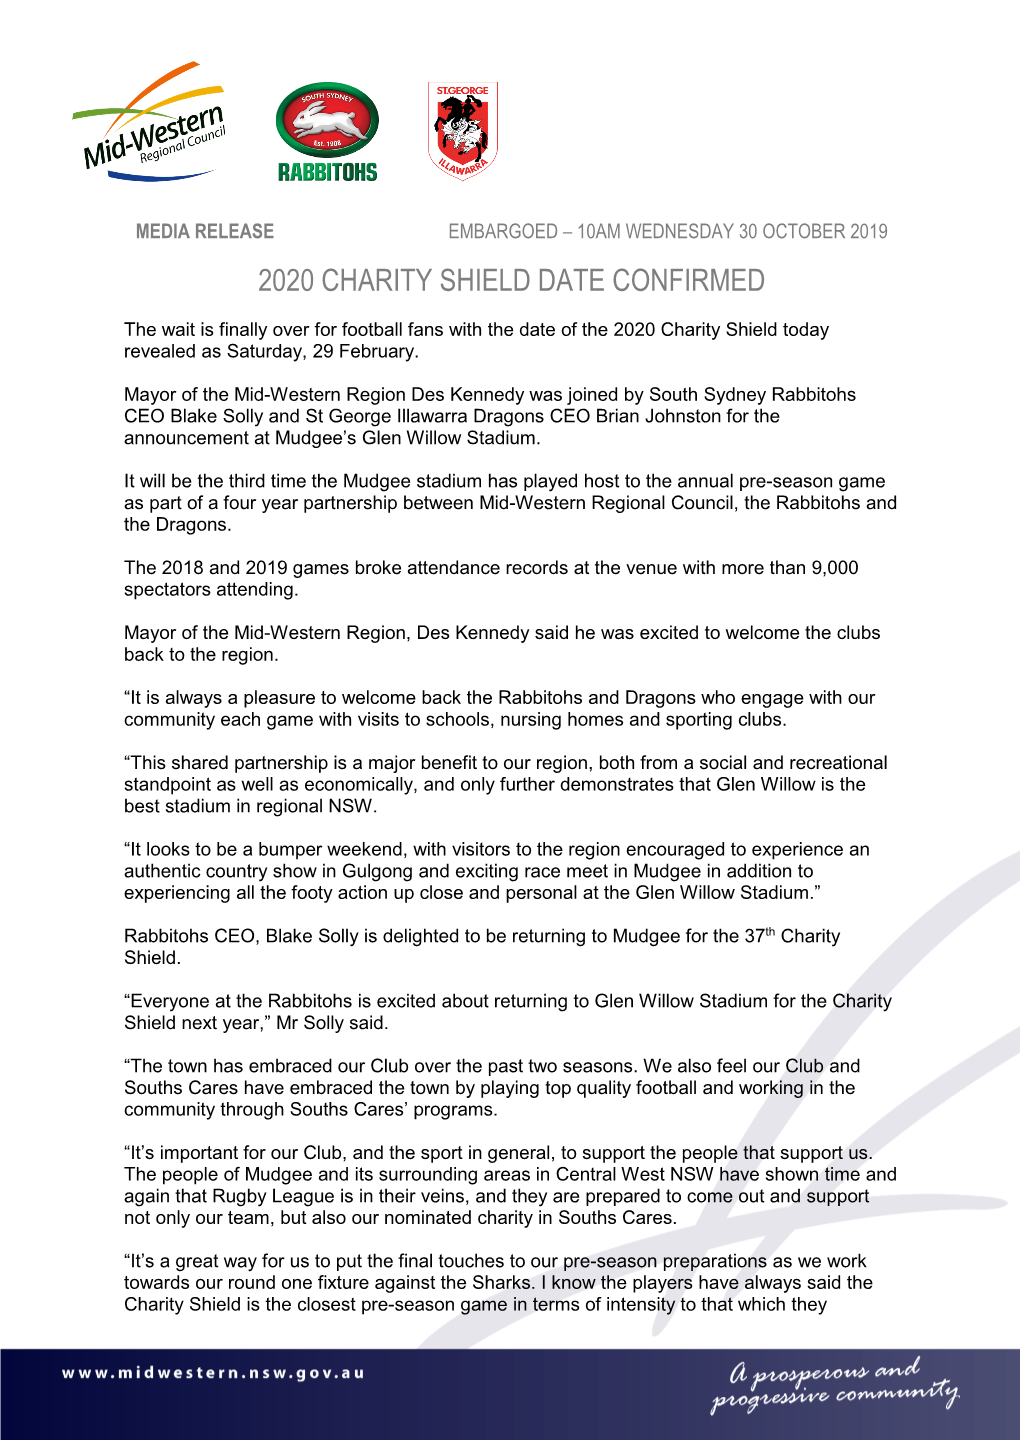 2020 Charity Shield Date Confirmed